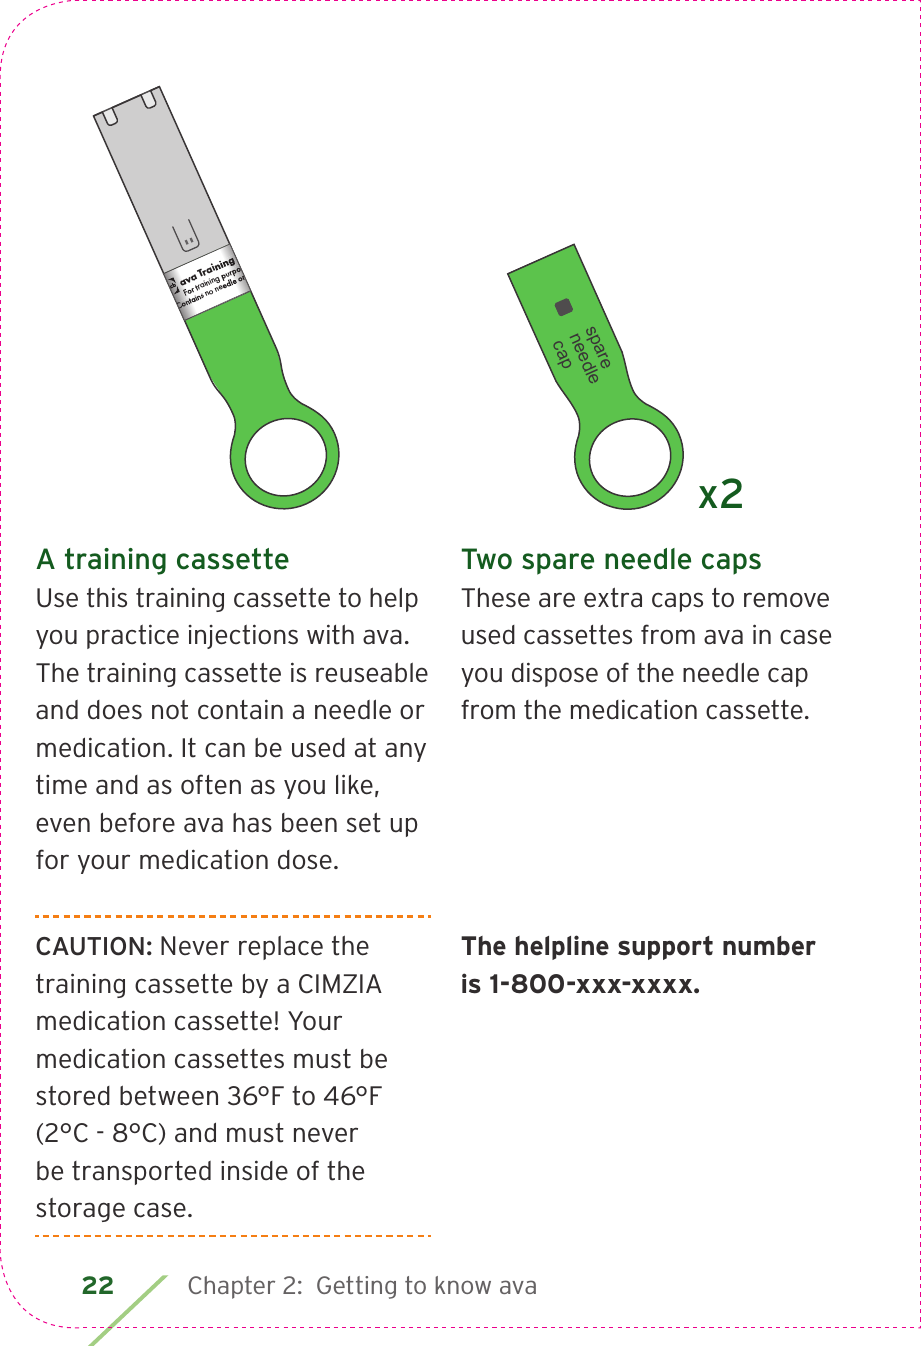 22 Chapter 2:  Getting to know avaA training cassetteUse this training cassette to help you practice injections with ava. The training cassette is reuseable and does not contain a needle or medication. It can be used at any time and as often as you like, even before ava has been set up for your medication dose.CAUTION: Never replace the training cassette by a CIMZIA medication cassette! Your medication cassettes must be stored between 36°F to 46°F (2°C - 8°C) and must never be transported inside of the storage case.Two spare needle capsThese are extra caps to remove used cassettes from ava in case you dispose of the needle cap from the medication cassette.The helpline support number is 1-800-xxx-xxxx.ava Training CassetteFor training purposes only.Contains no needle or medication.CIA79968ALBL4_CIM_PS6ava Training CassetteFor training purposes only.Contains no needle or medication.ava Training CassetteFor training purposes only.Contains no needle or medication.   spare needle capx2